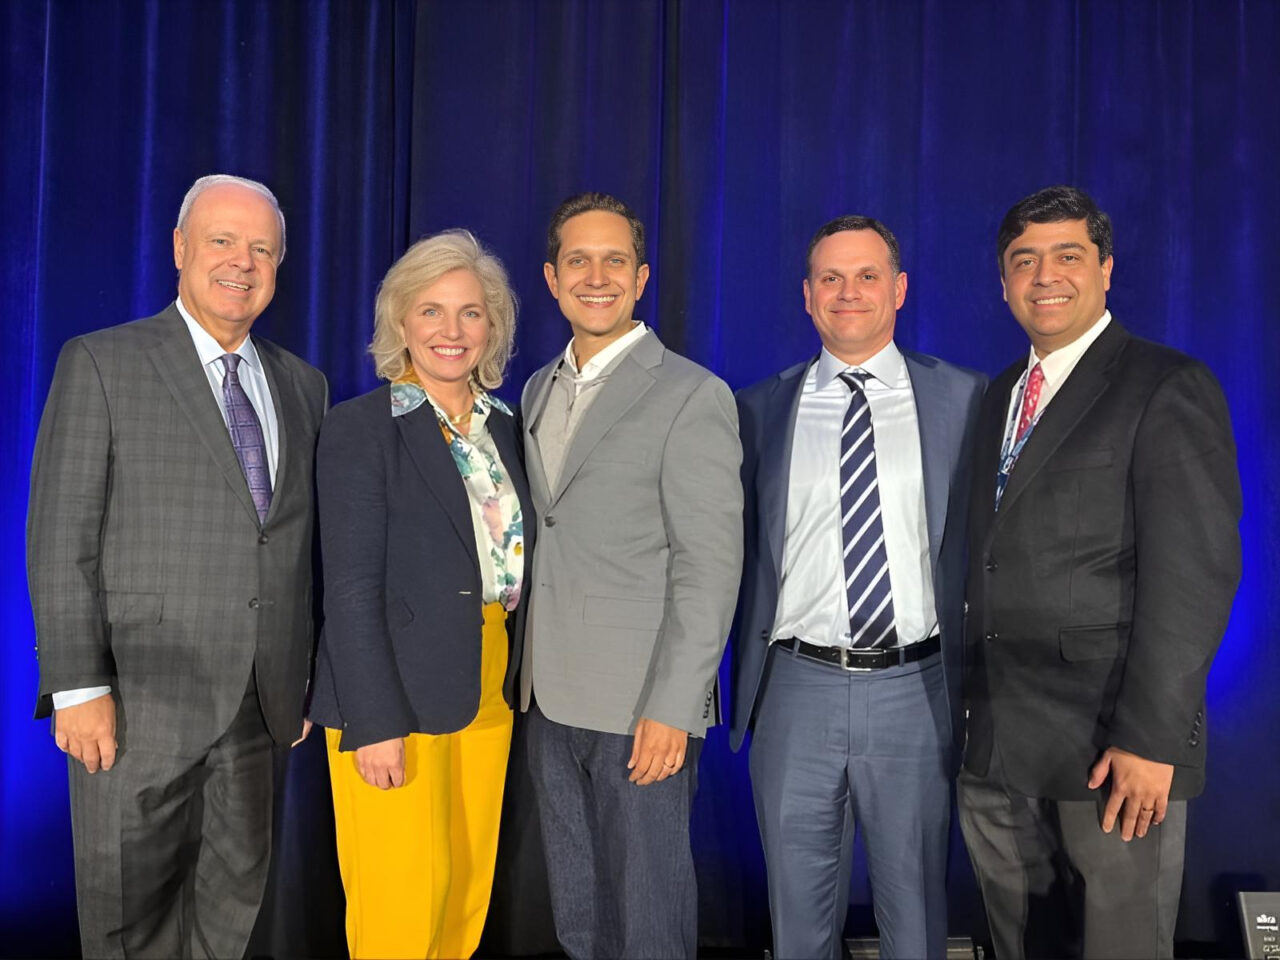 Vivek Subbiah: Grateful to have Jason Dorsey deliver a phenomenal and energetic keynote at the 27th Annual Scientific Meeting of SCRI! 